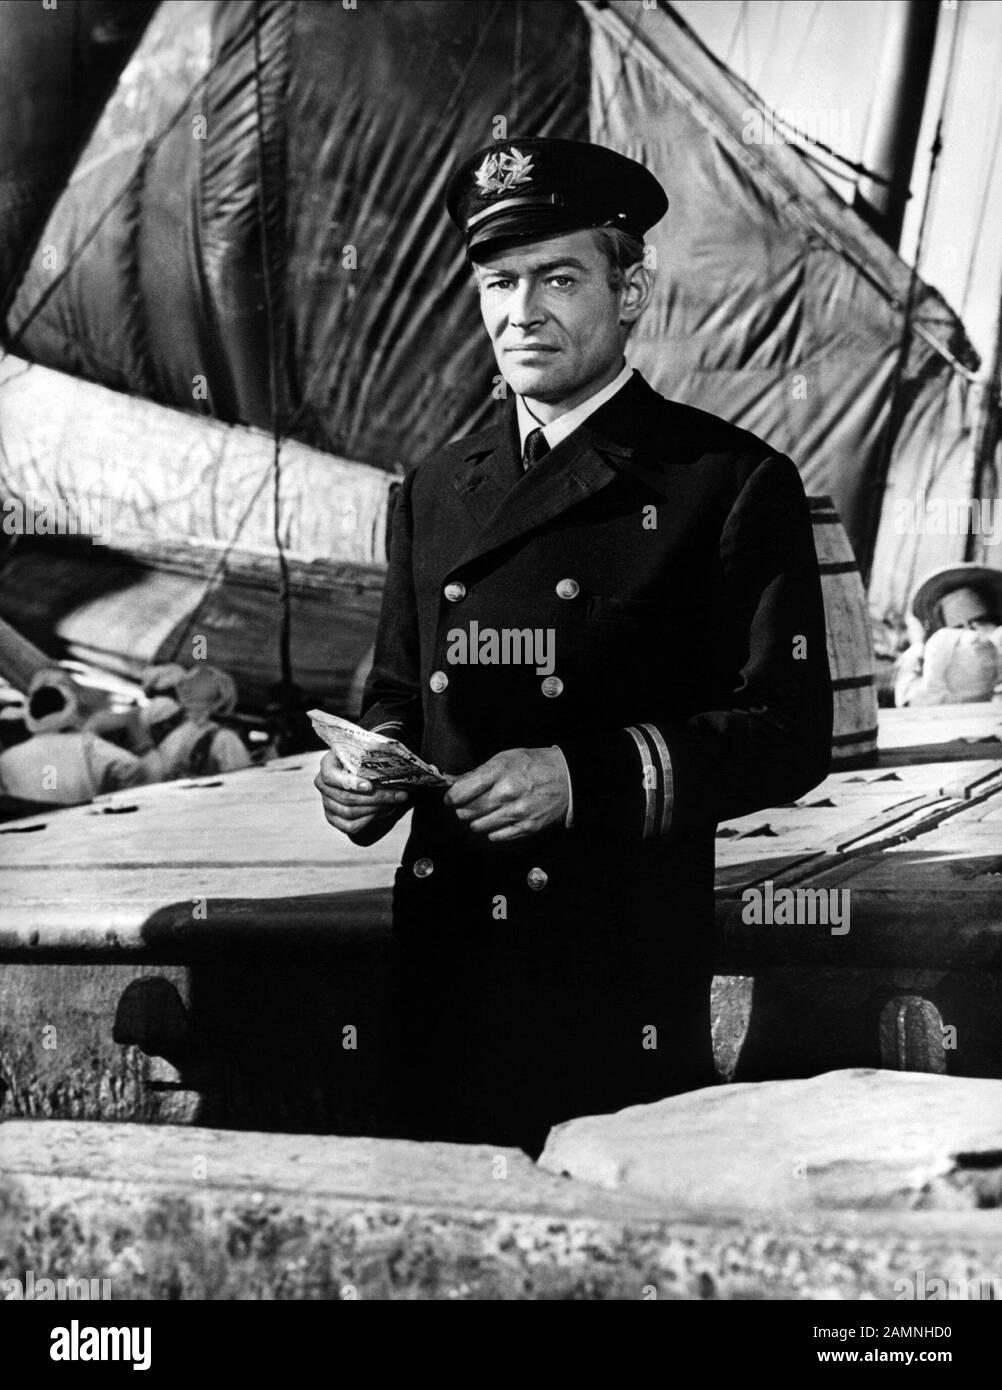 PIERRE O'TOOLE, LORD JIM, 1965 Banque D'Images